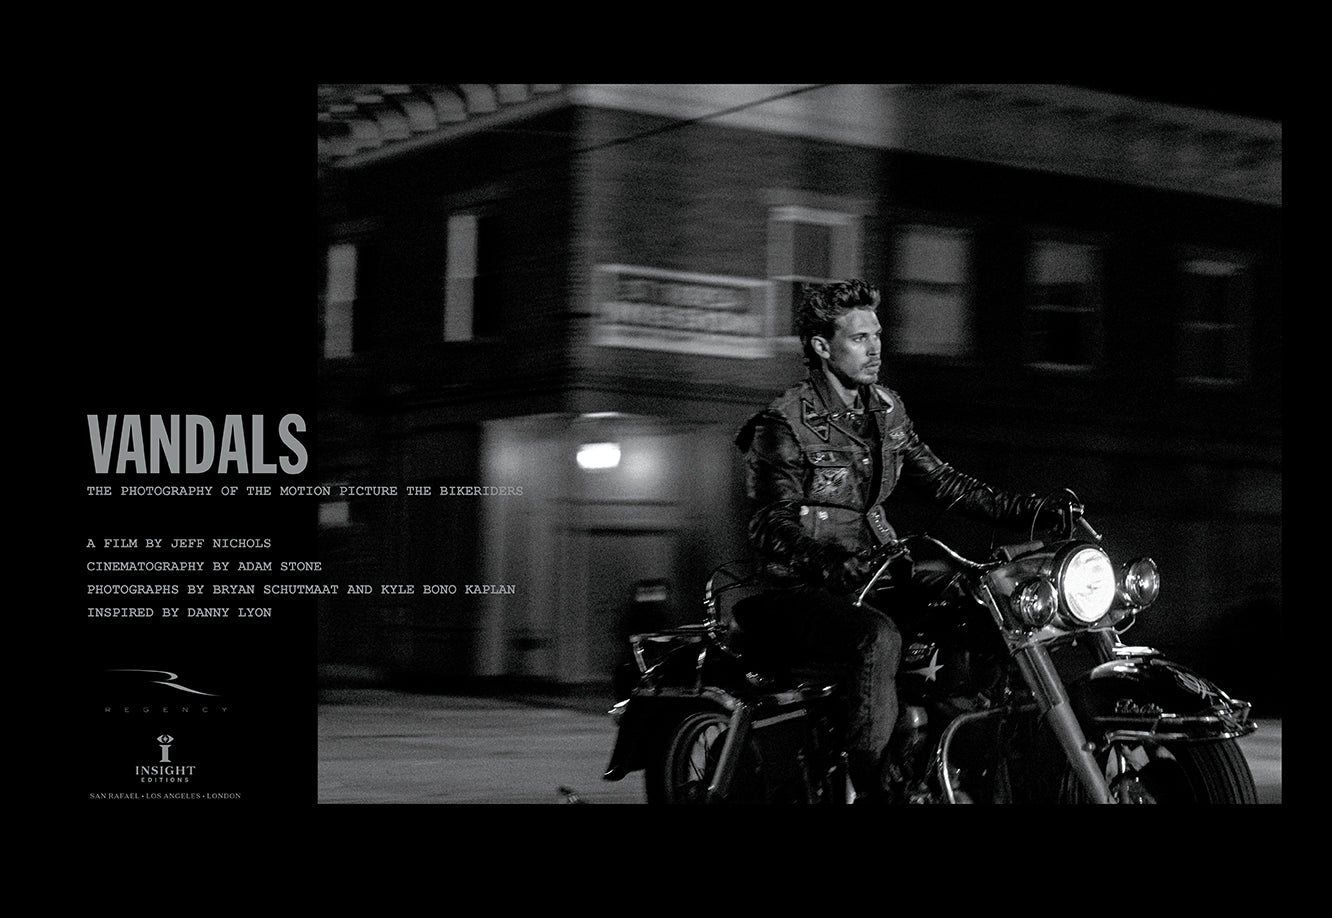 Vandals: The Photography of The Bikeriders: Tom Hardy